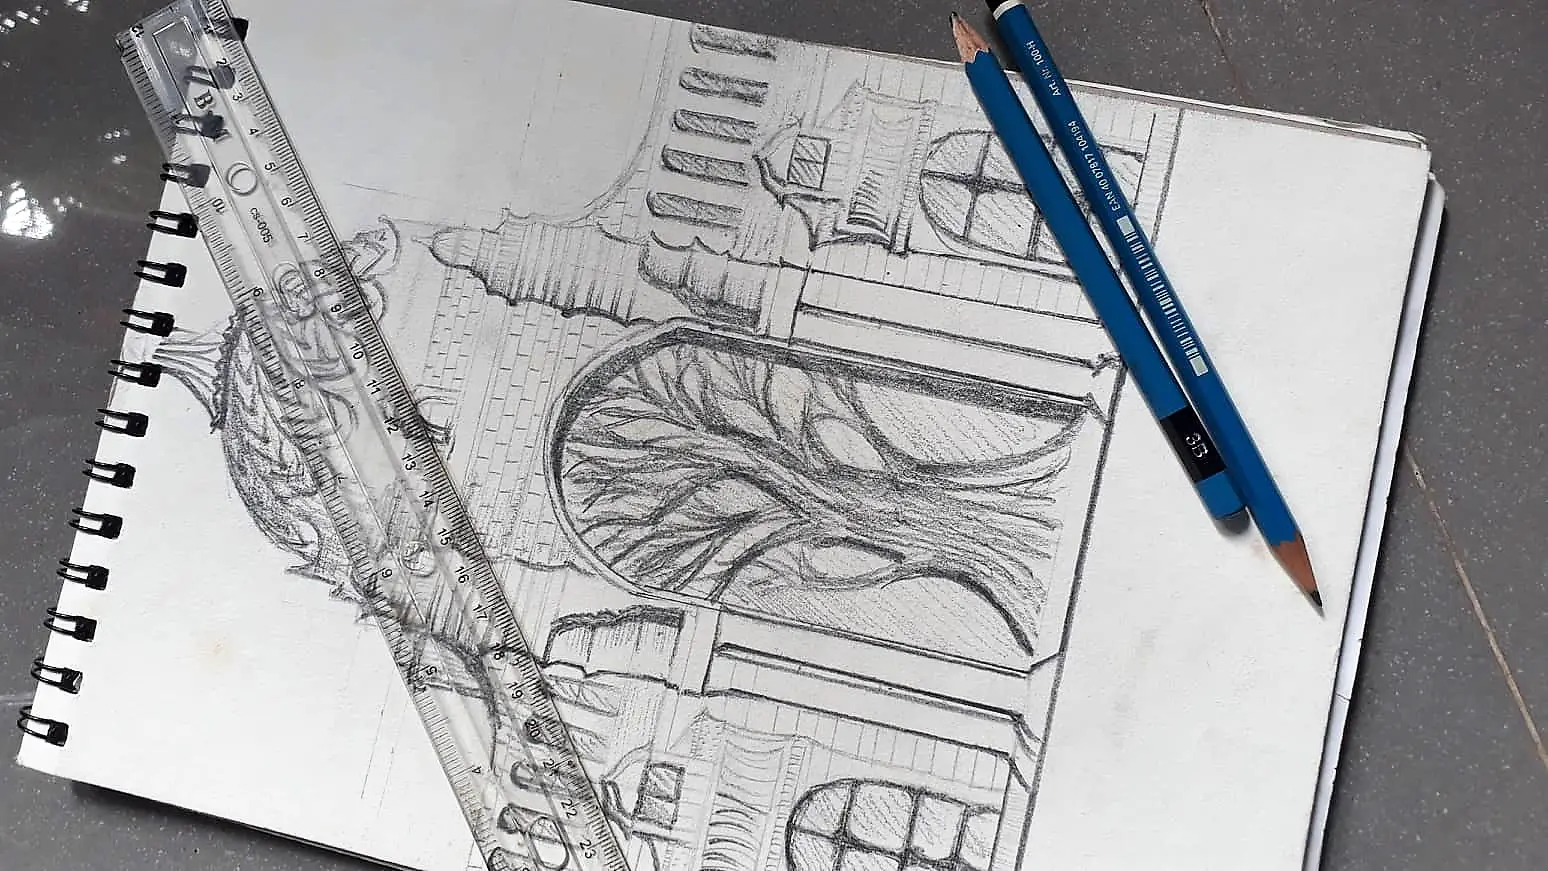 Is it okay to use a ruler in art? (Or is it cheating?)